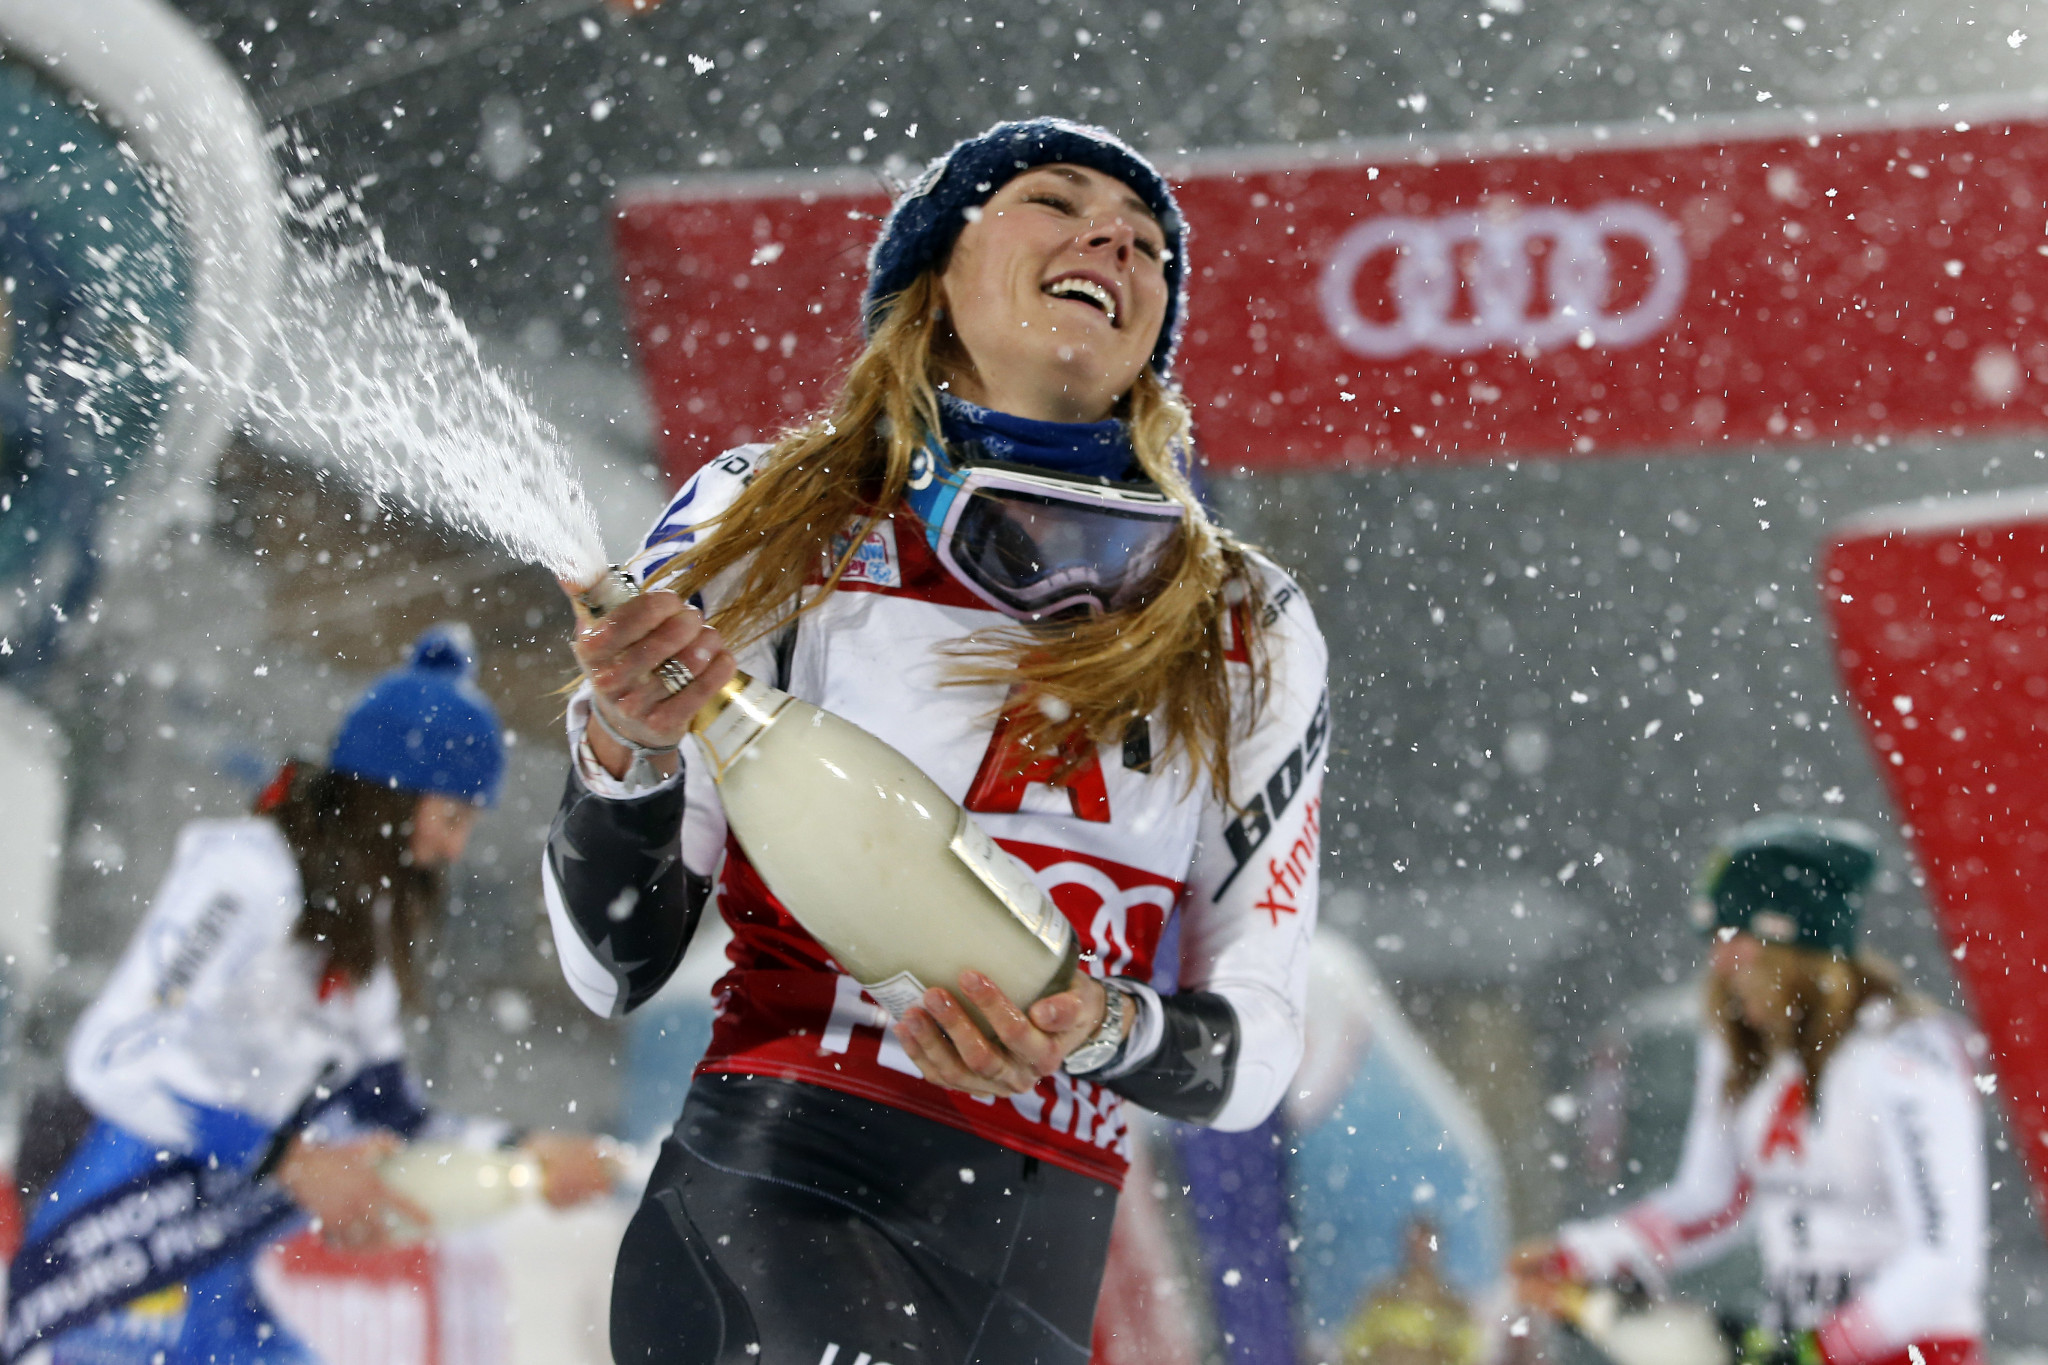 Alpine skier Mikaela Shiffrin won six World Cup races in December to take her overall tally to 51 ©Getty Images